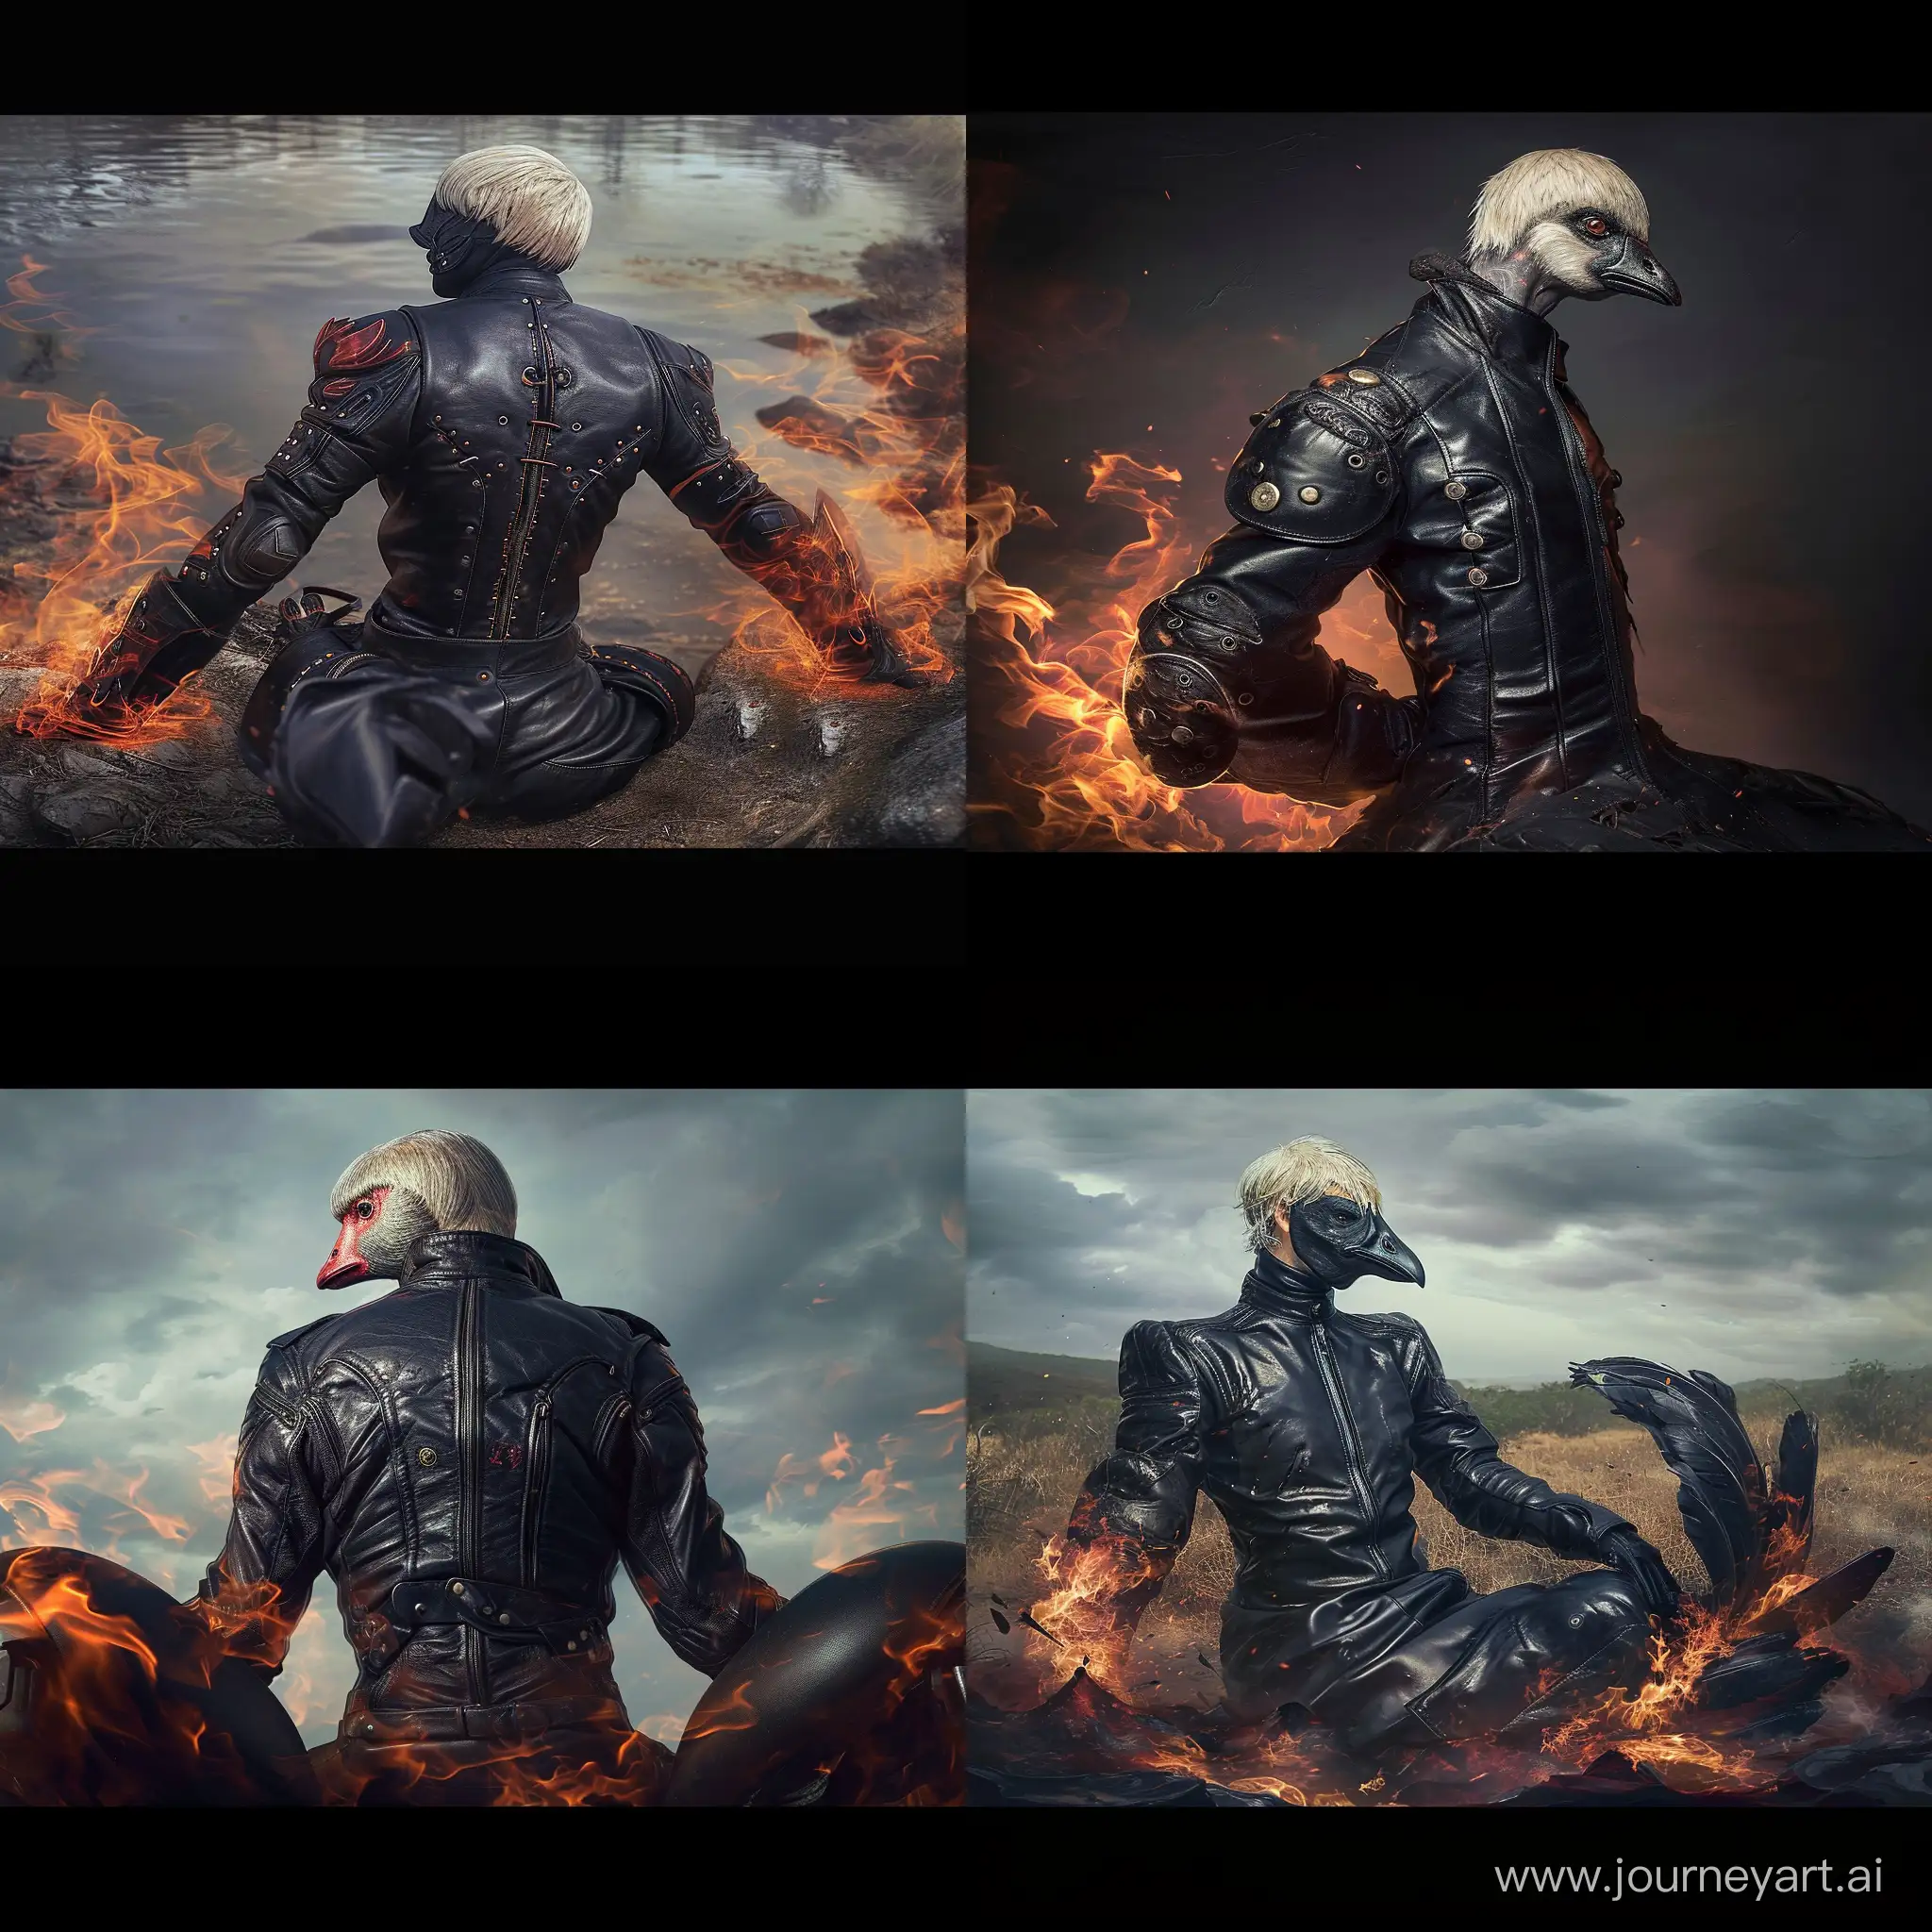 https://i.postimg.cc/4yzRxKCB/i.jpg Goose in Leather, Ghost Rider, view from afar, panorama, --v 6